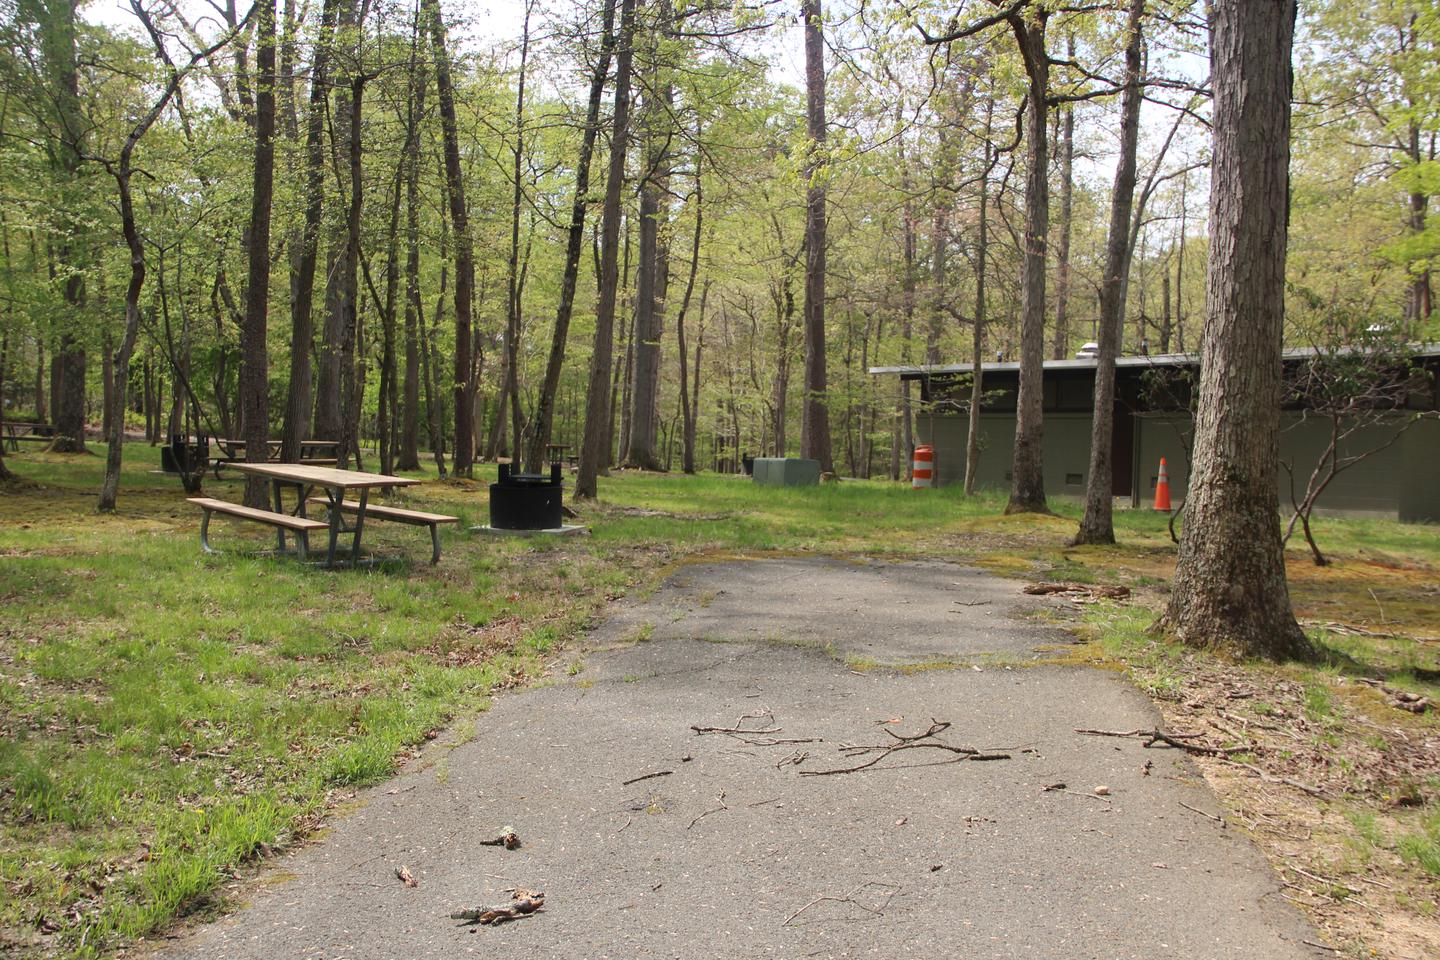 C94 C Loop of the Greenbelt Park Maryland campground